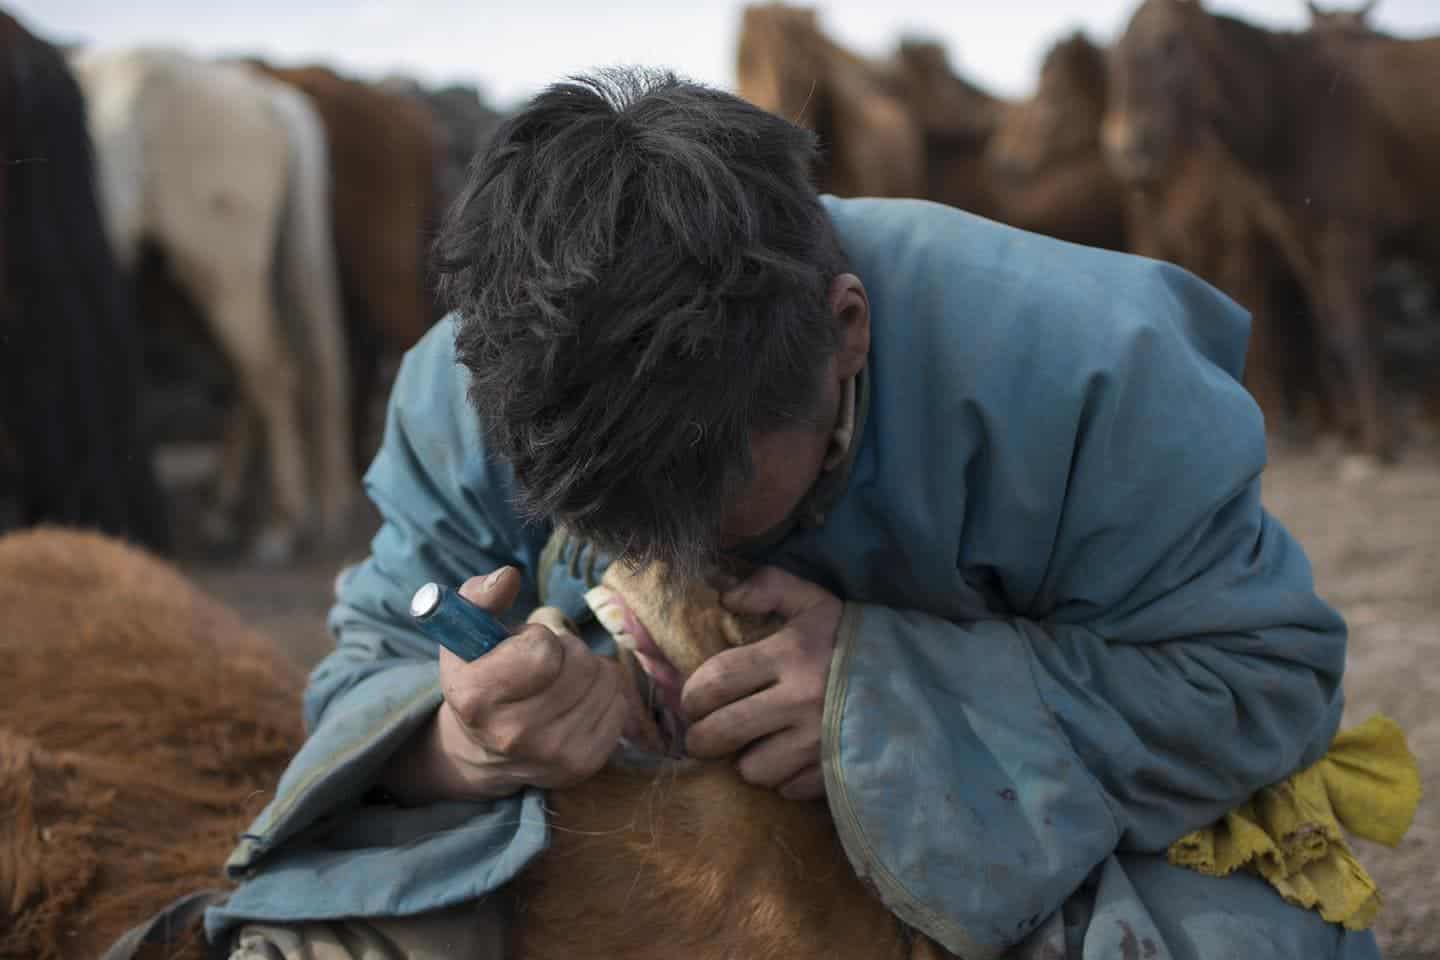 Mongolian herder removing first premolar, or 'wolf tooth', from a young horse during the spring roundup using a screwdriver. Credit: Dimitri Staszewski. Taylor et al. 2018. Origins of Equine Dentistry. PNAS.